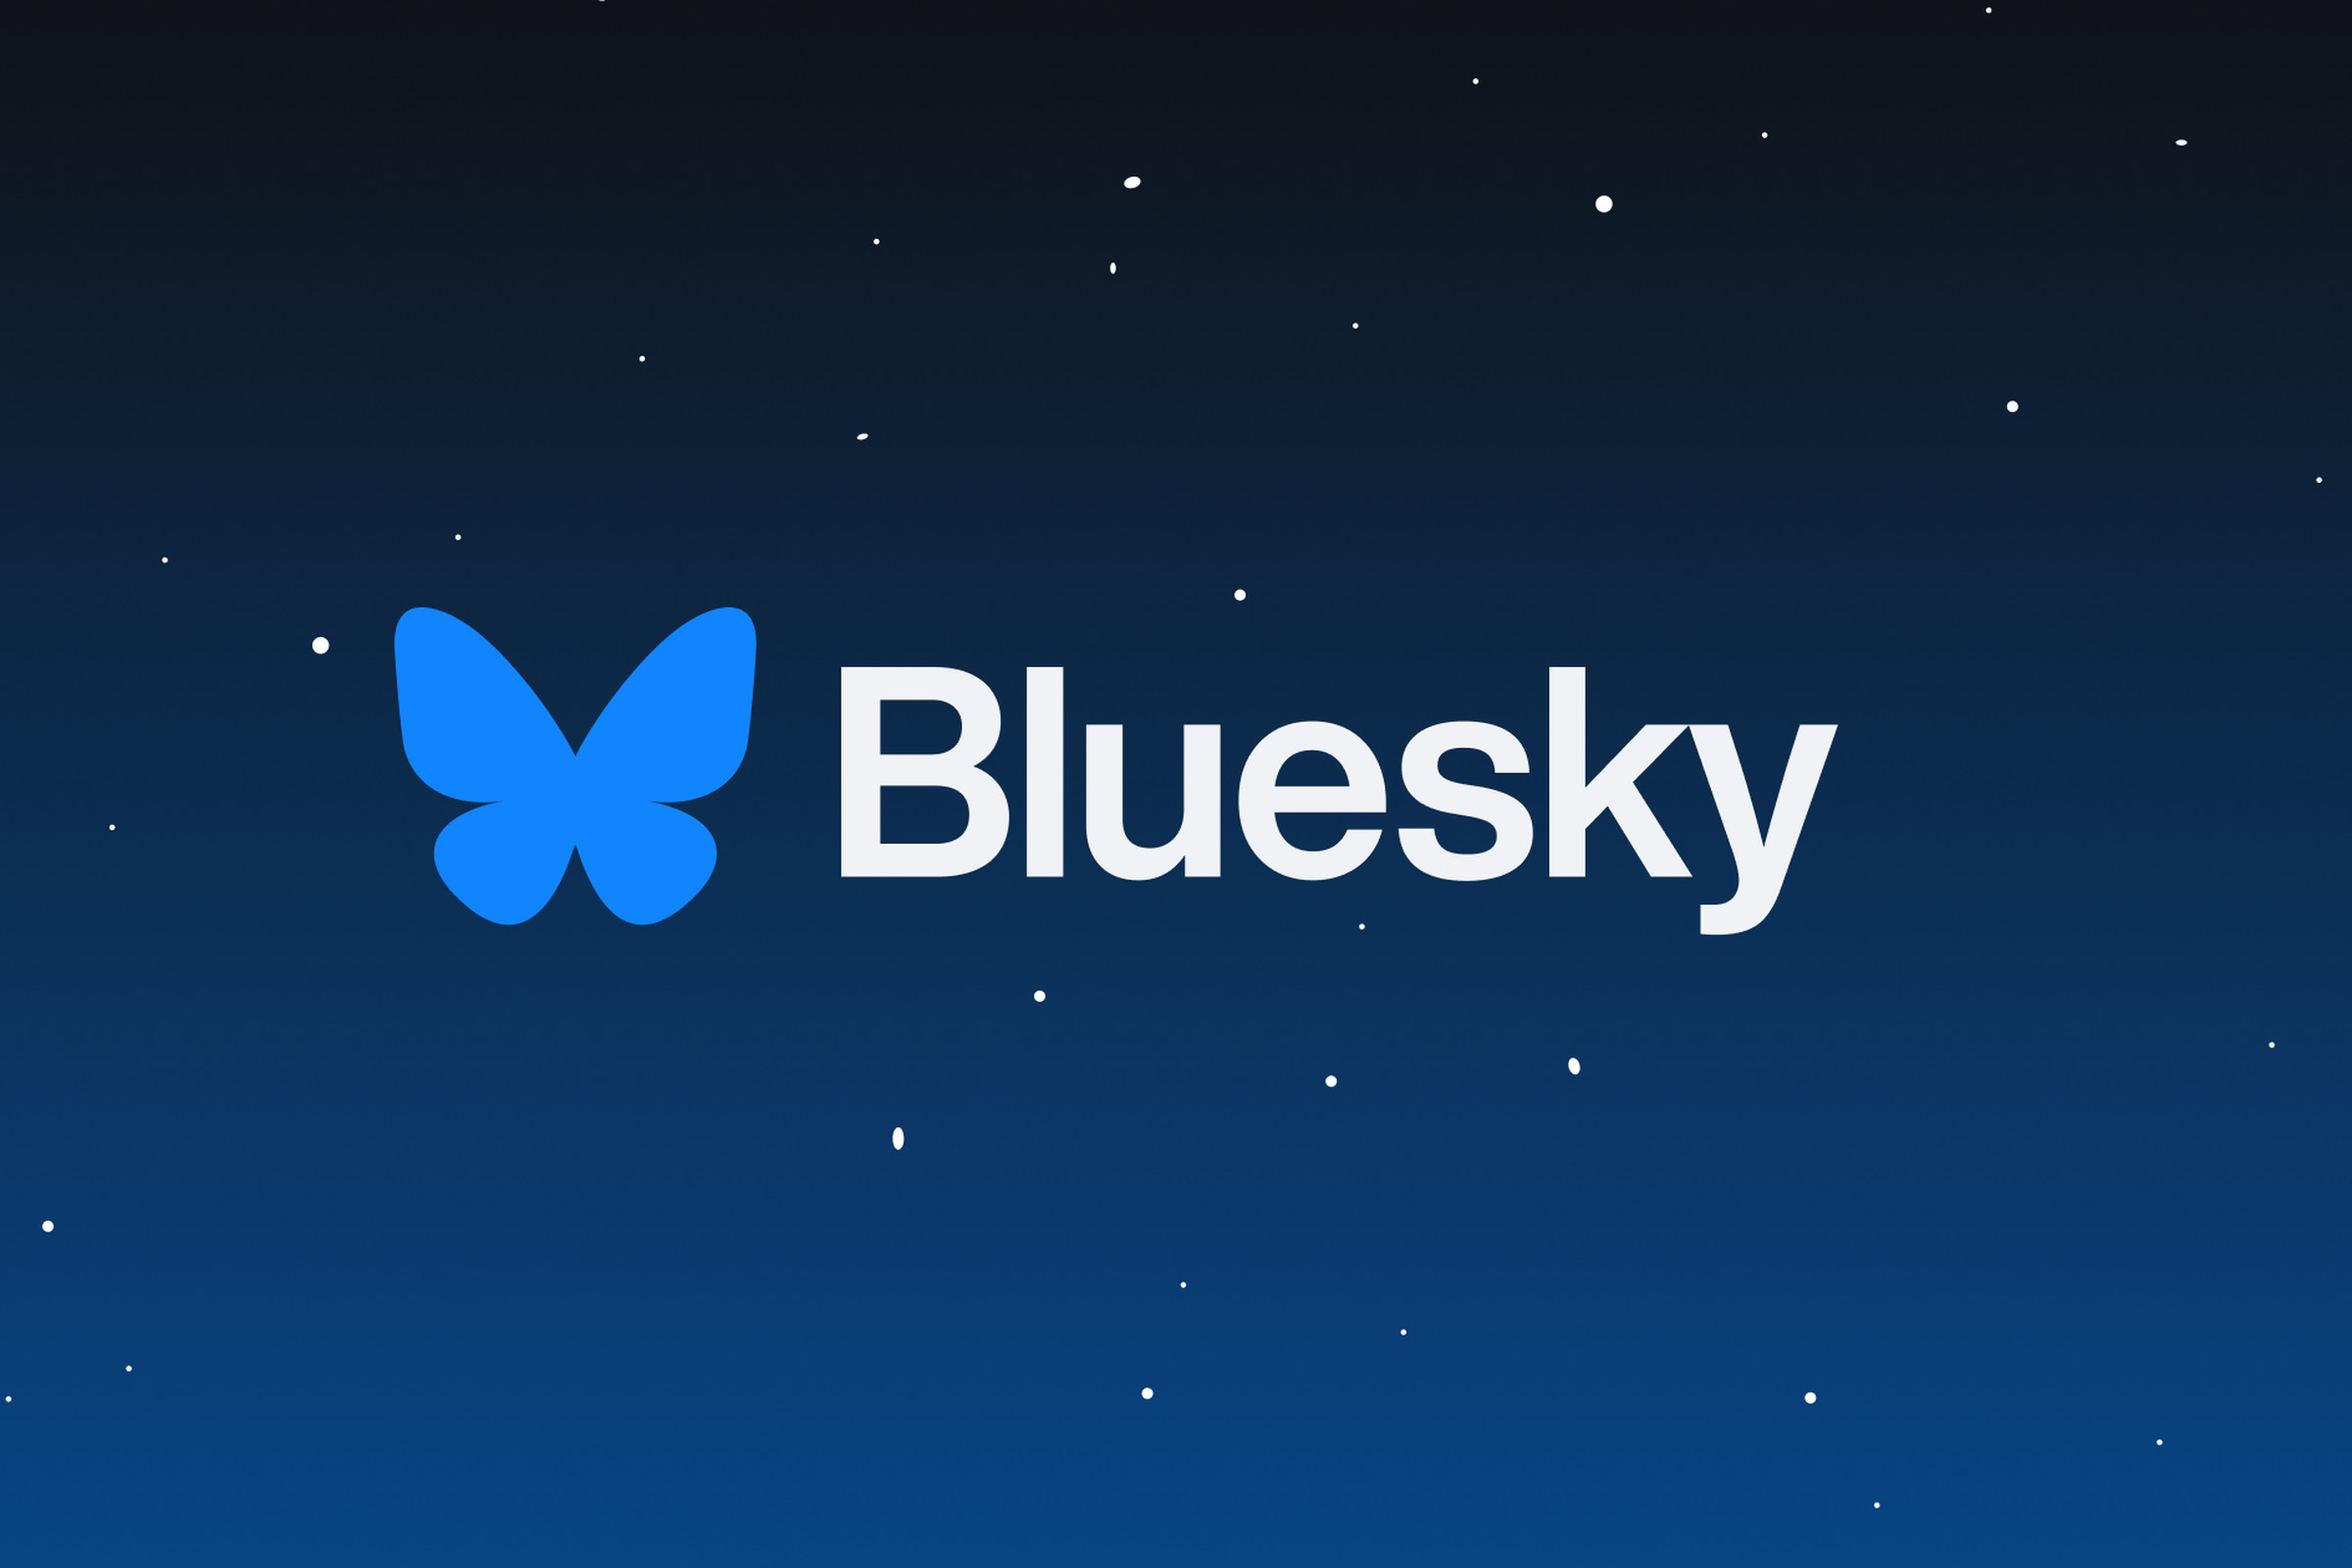 A graphic of the Bluesky logo.